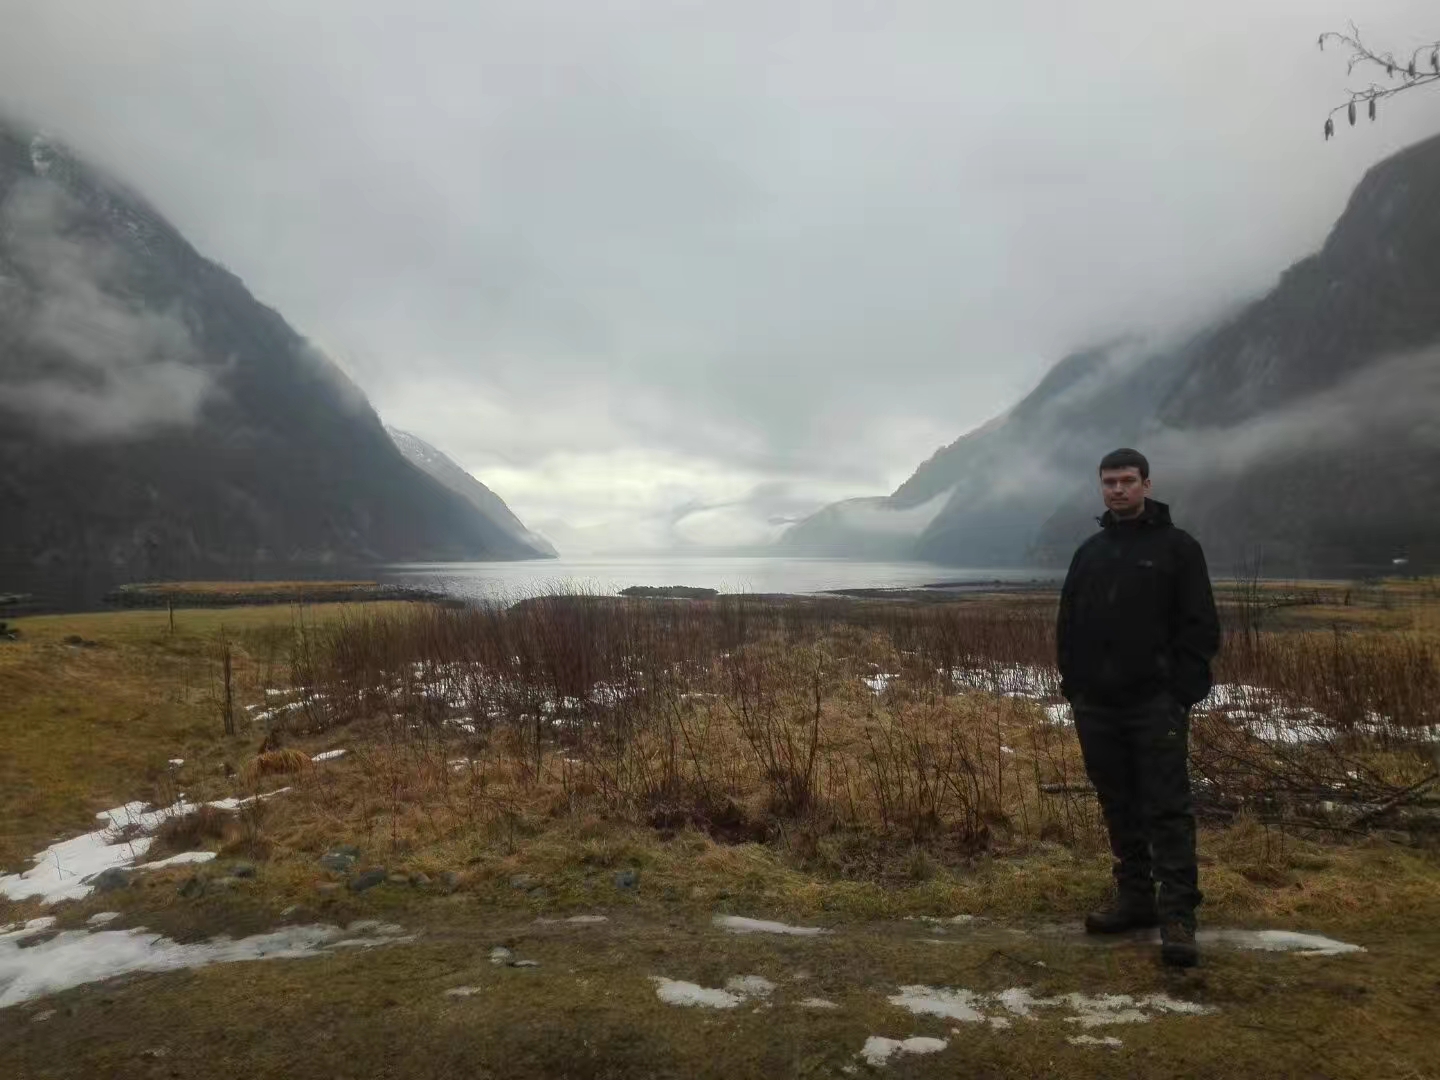 Paying an exploratory business visit to a Base Camp in Norway